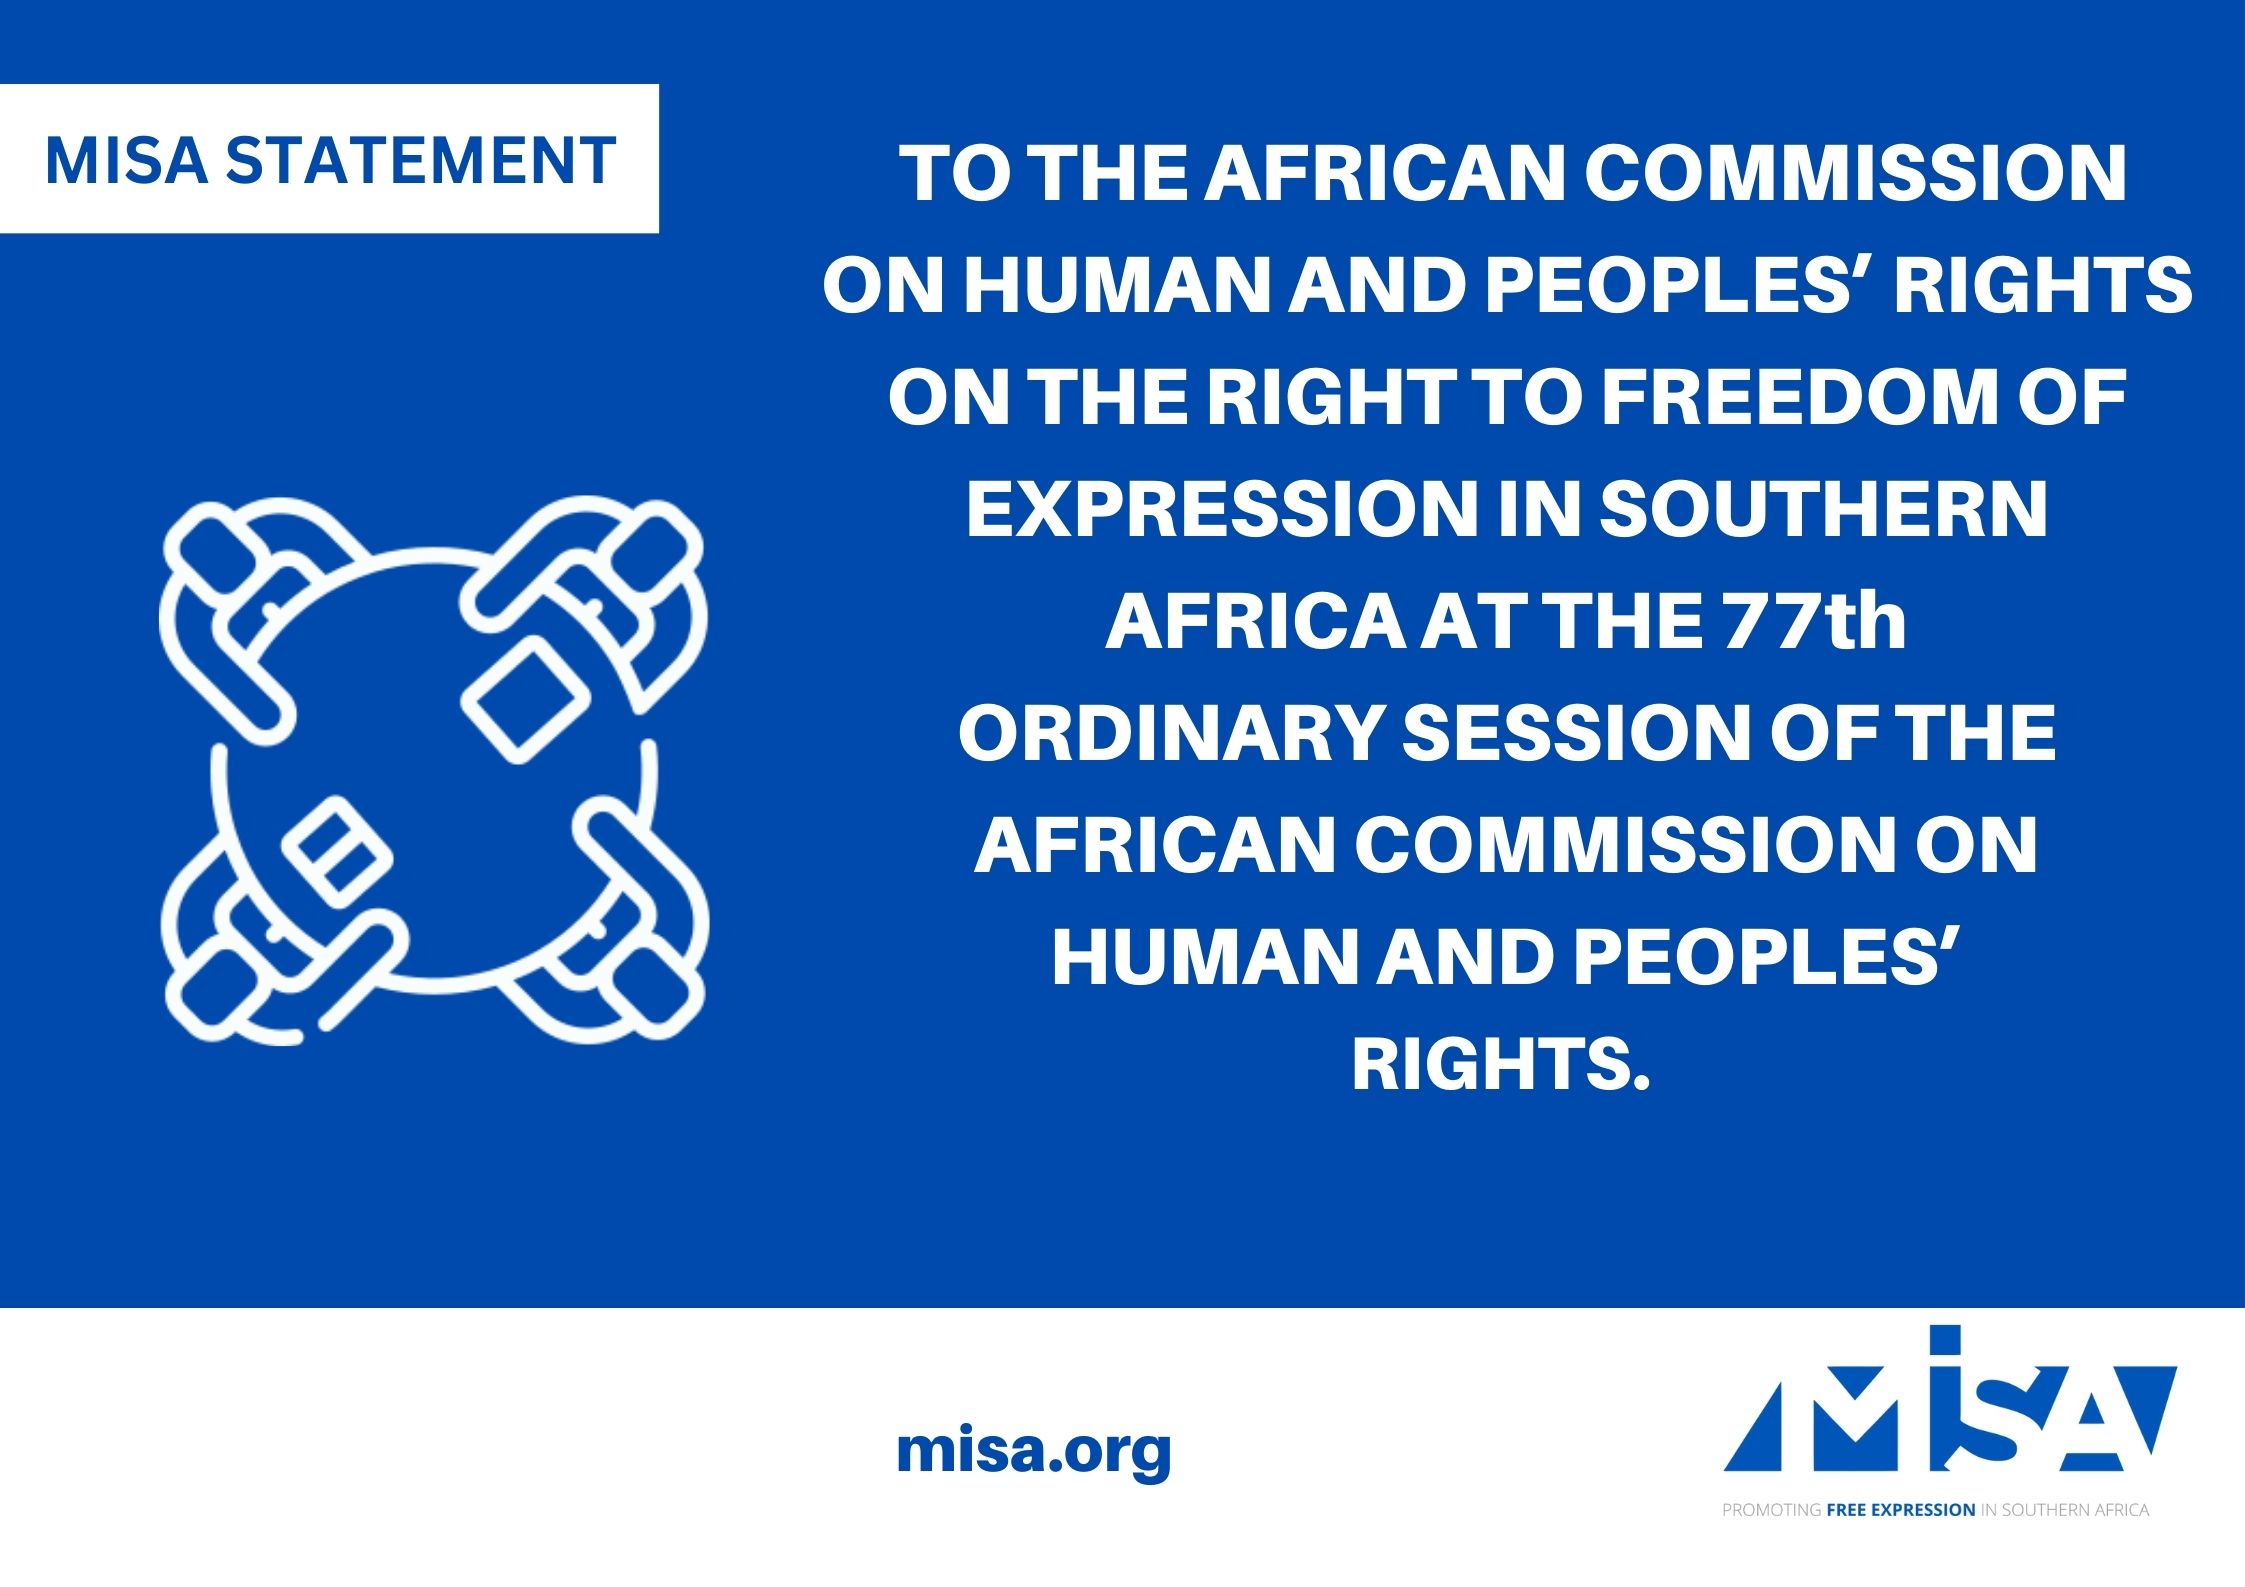 MISA STATEMENT TO THE AFRICAN COMMISSION ON HUMAN AND PEOPLES’ RIGHTS  ON THE RIGHT TO FREEDOM OF EXPRESSION IN SOUTHERN AFRICA AT THE 77th ORDINARY SESSION OF THE AFRICAN COMMISSION ON HUMAN AND PEOPLES’ RIGHTS.